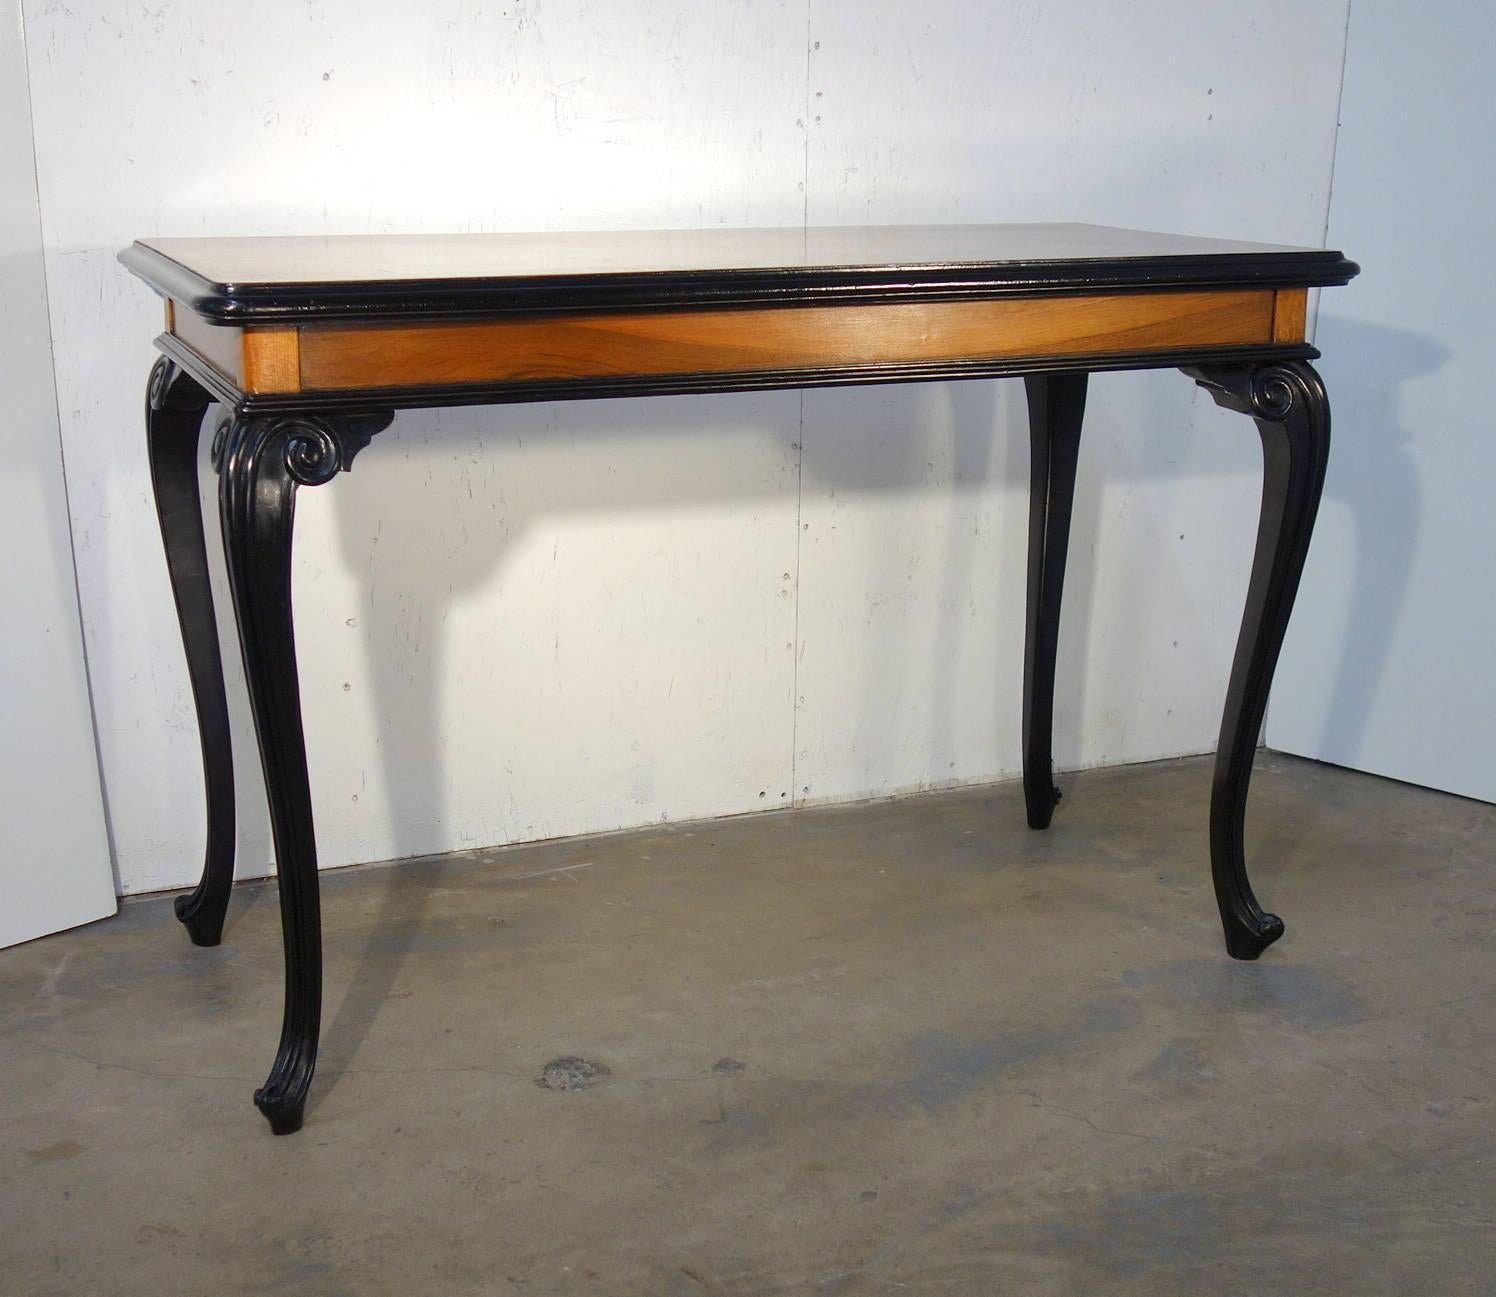 Lombardy style center table in walnut with four curved legs and ebony profiles. Wonderful modern line, clean and elegant. 
Stylish for a small entry table or writing desk.
Measures: 47